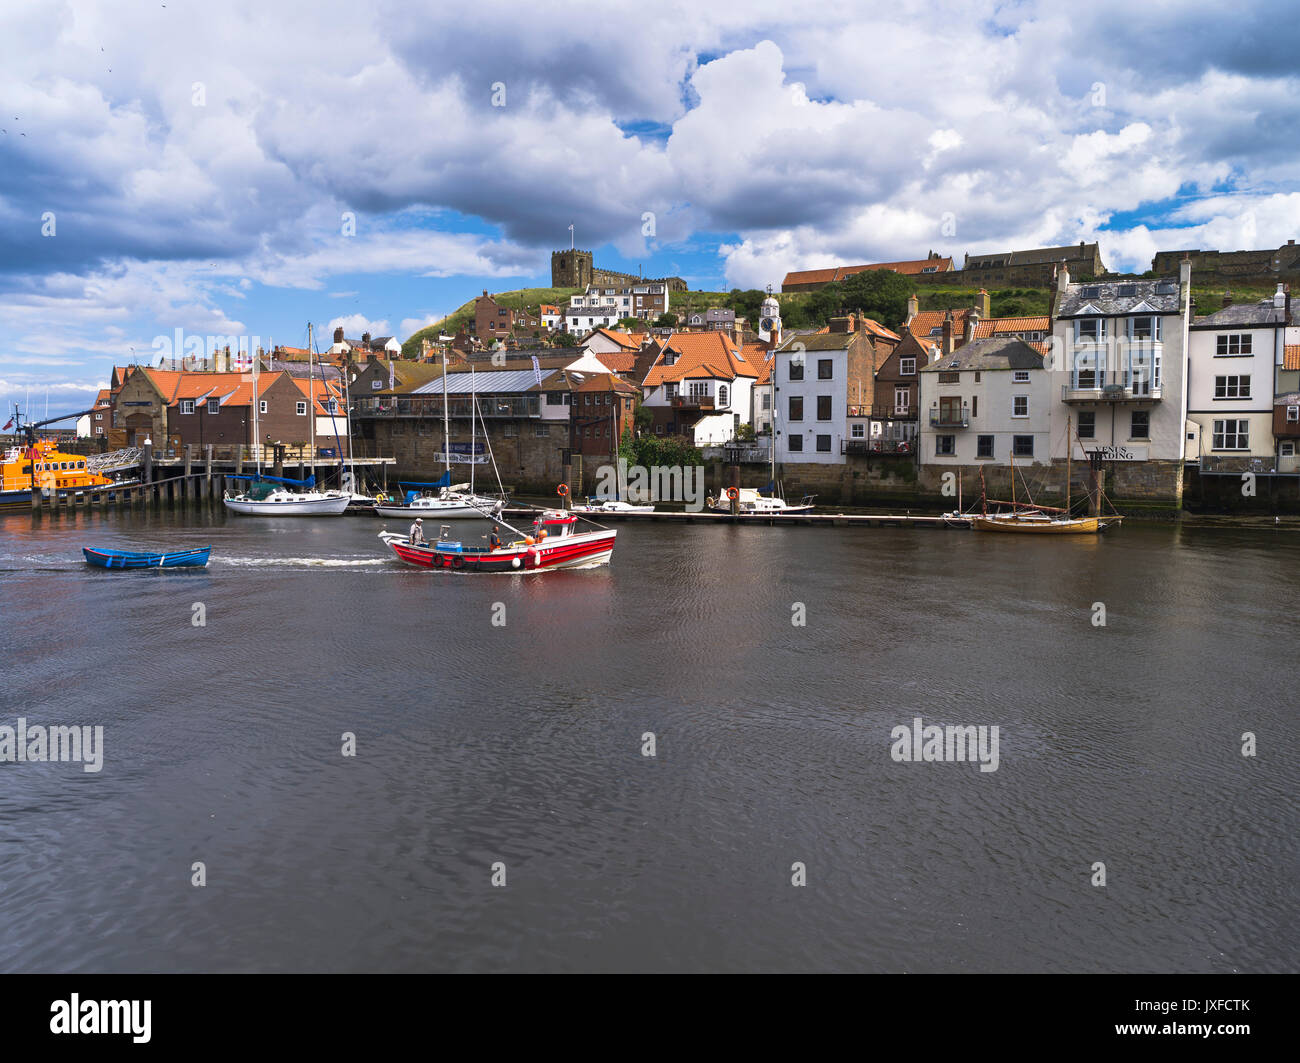 dh Fishing boat fisherman WHITBY NORTH YORKSHIRE Returning to town houses abbey boats england village coast harbour spring uk Stock Photo